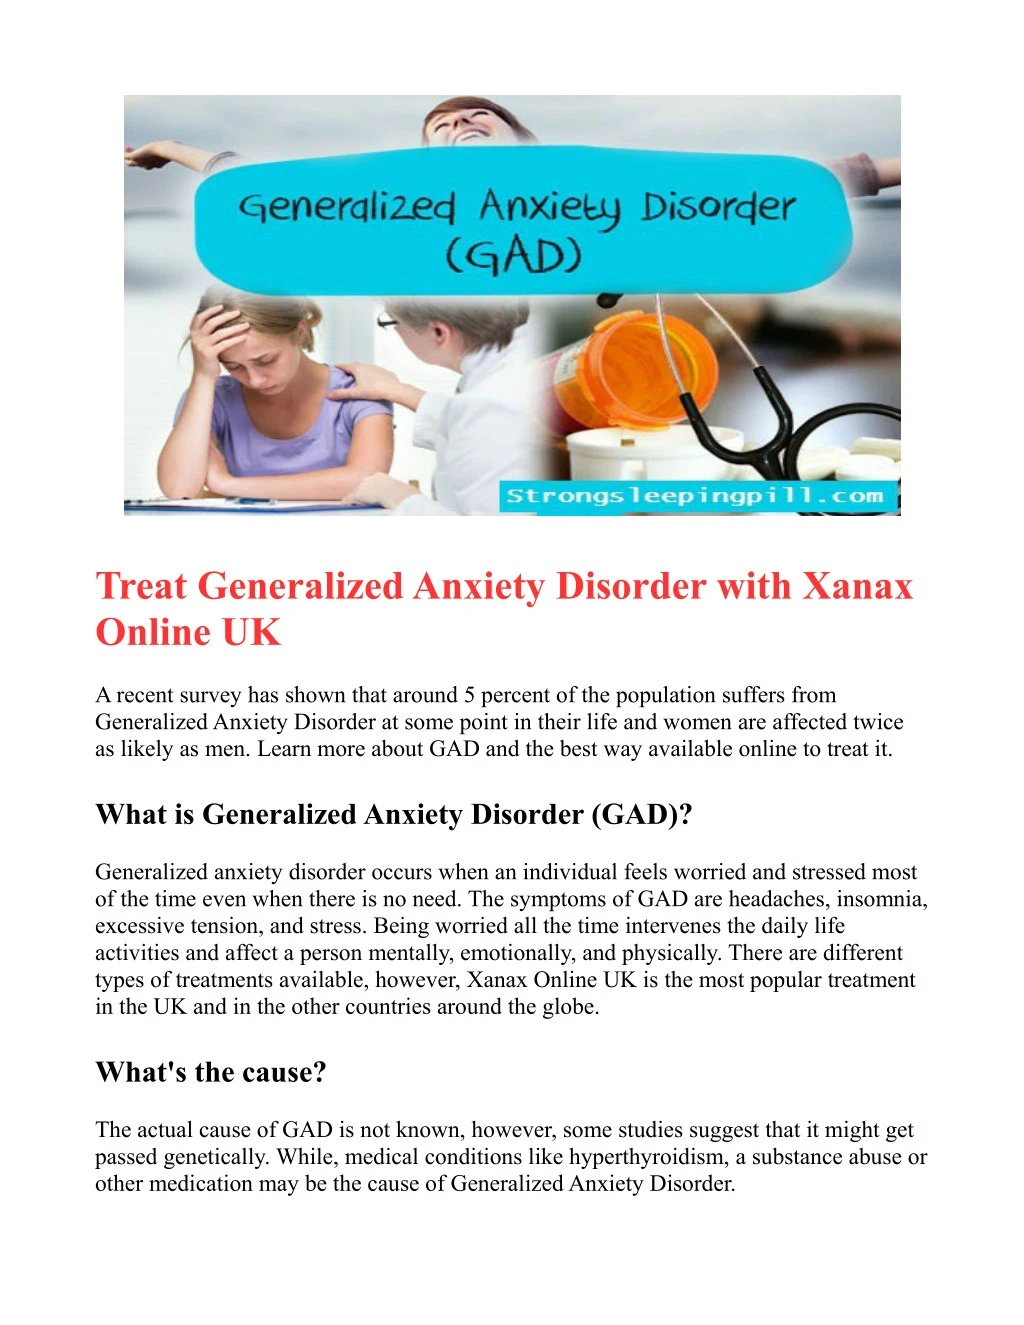 treat generalized anxiety disorder with xanax